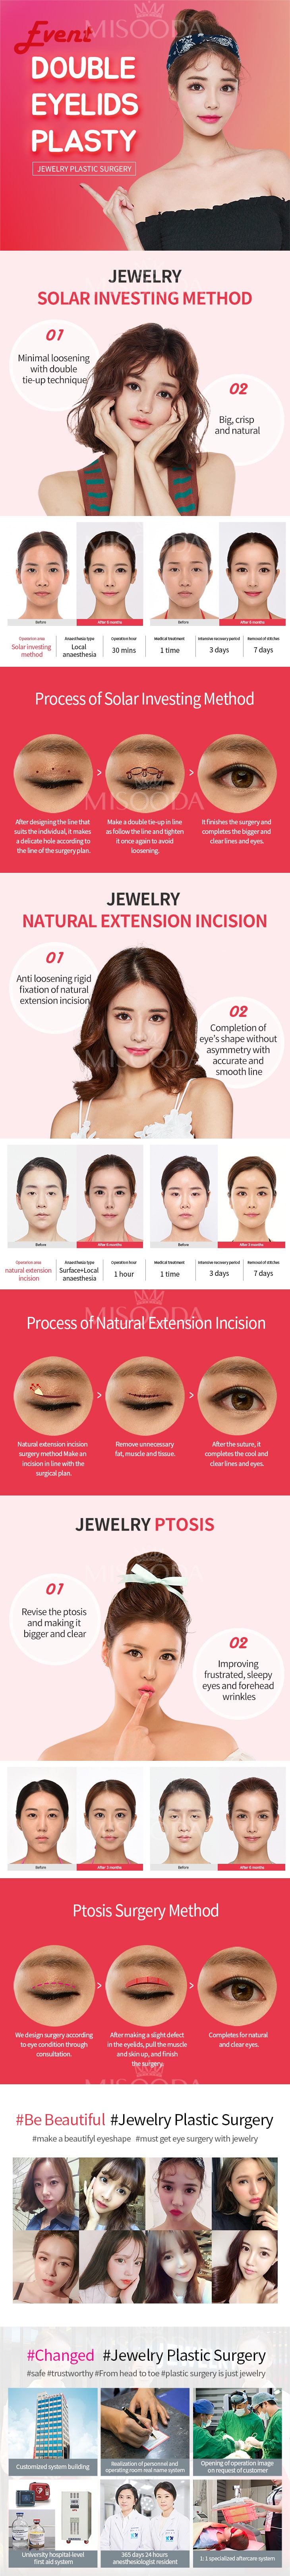 Double Eyelid Surgery (Contact MISOODA for price)